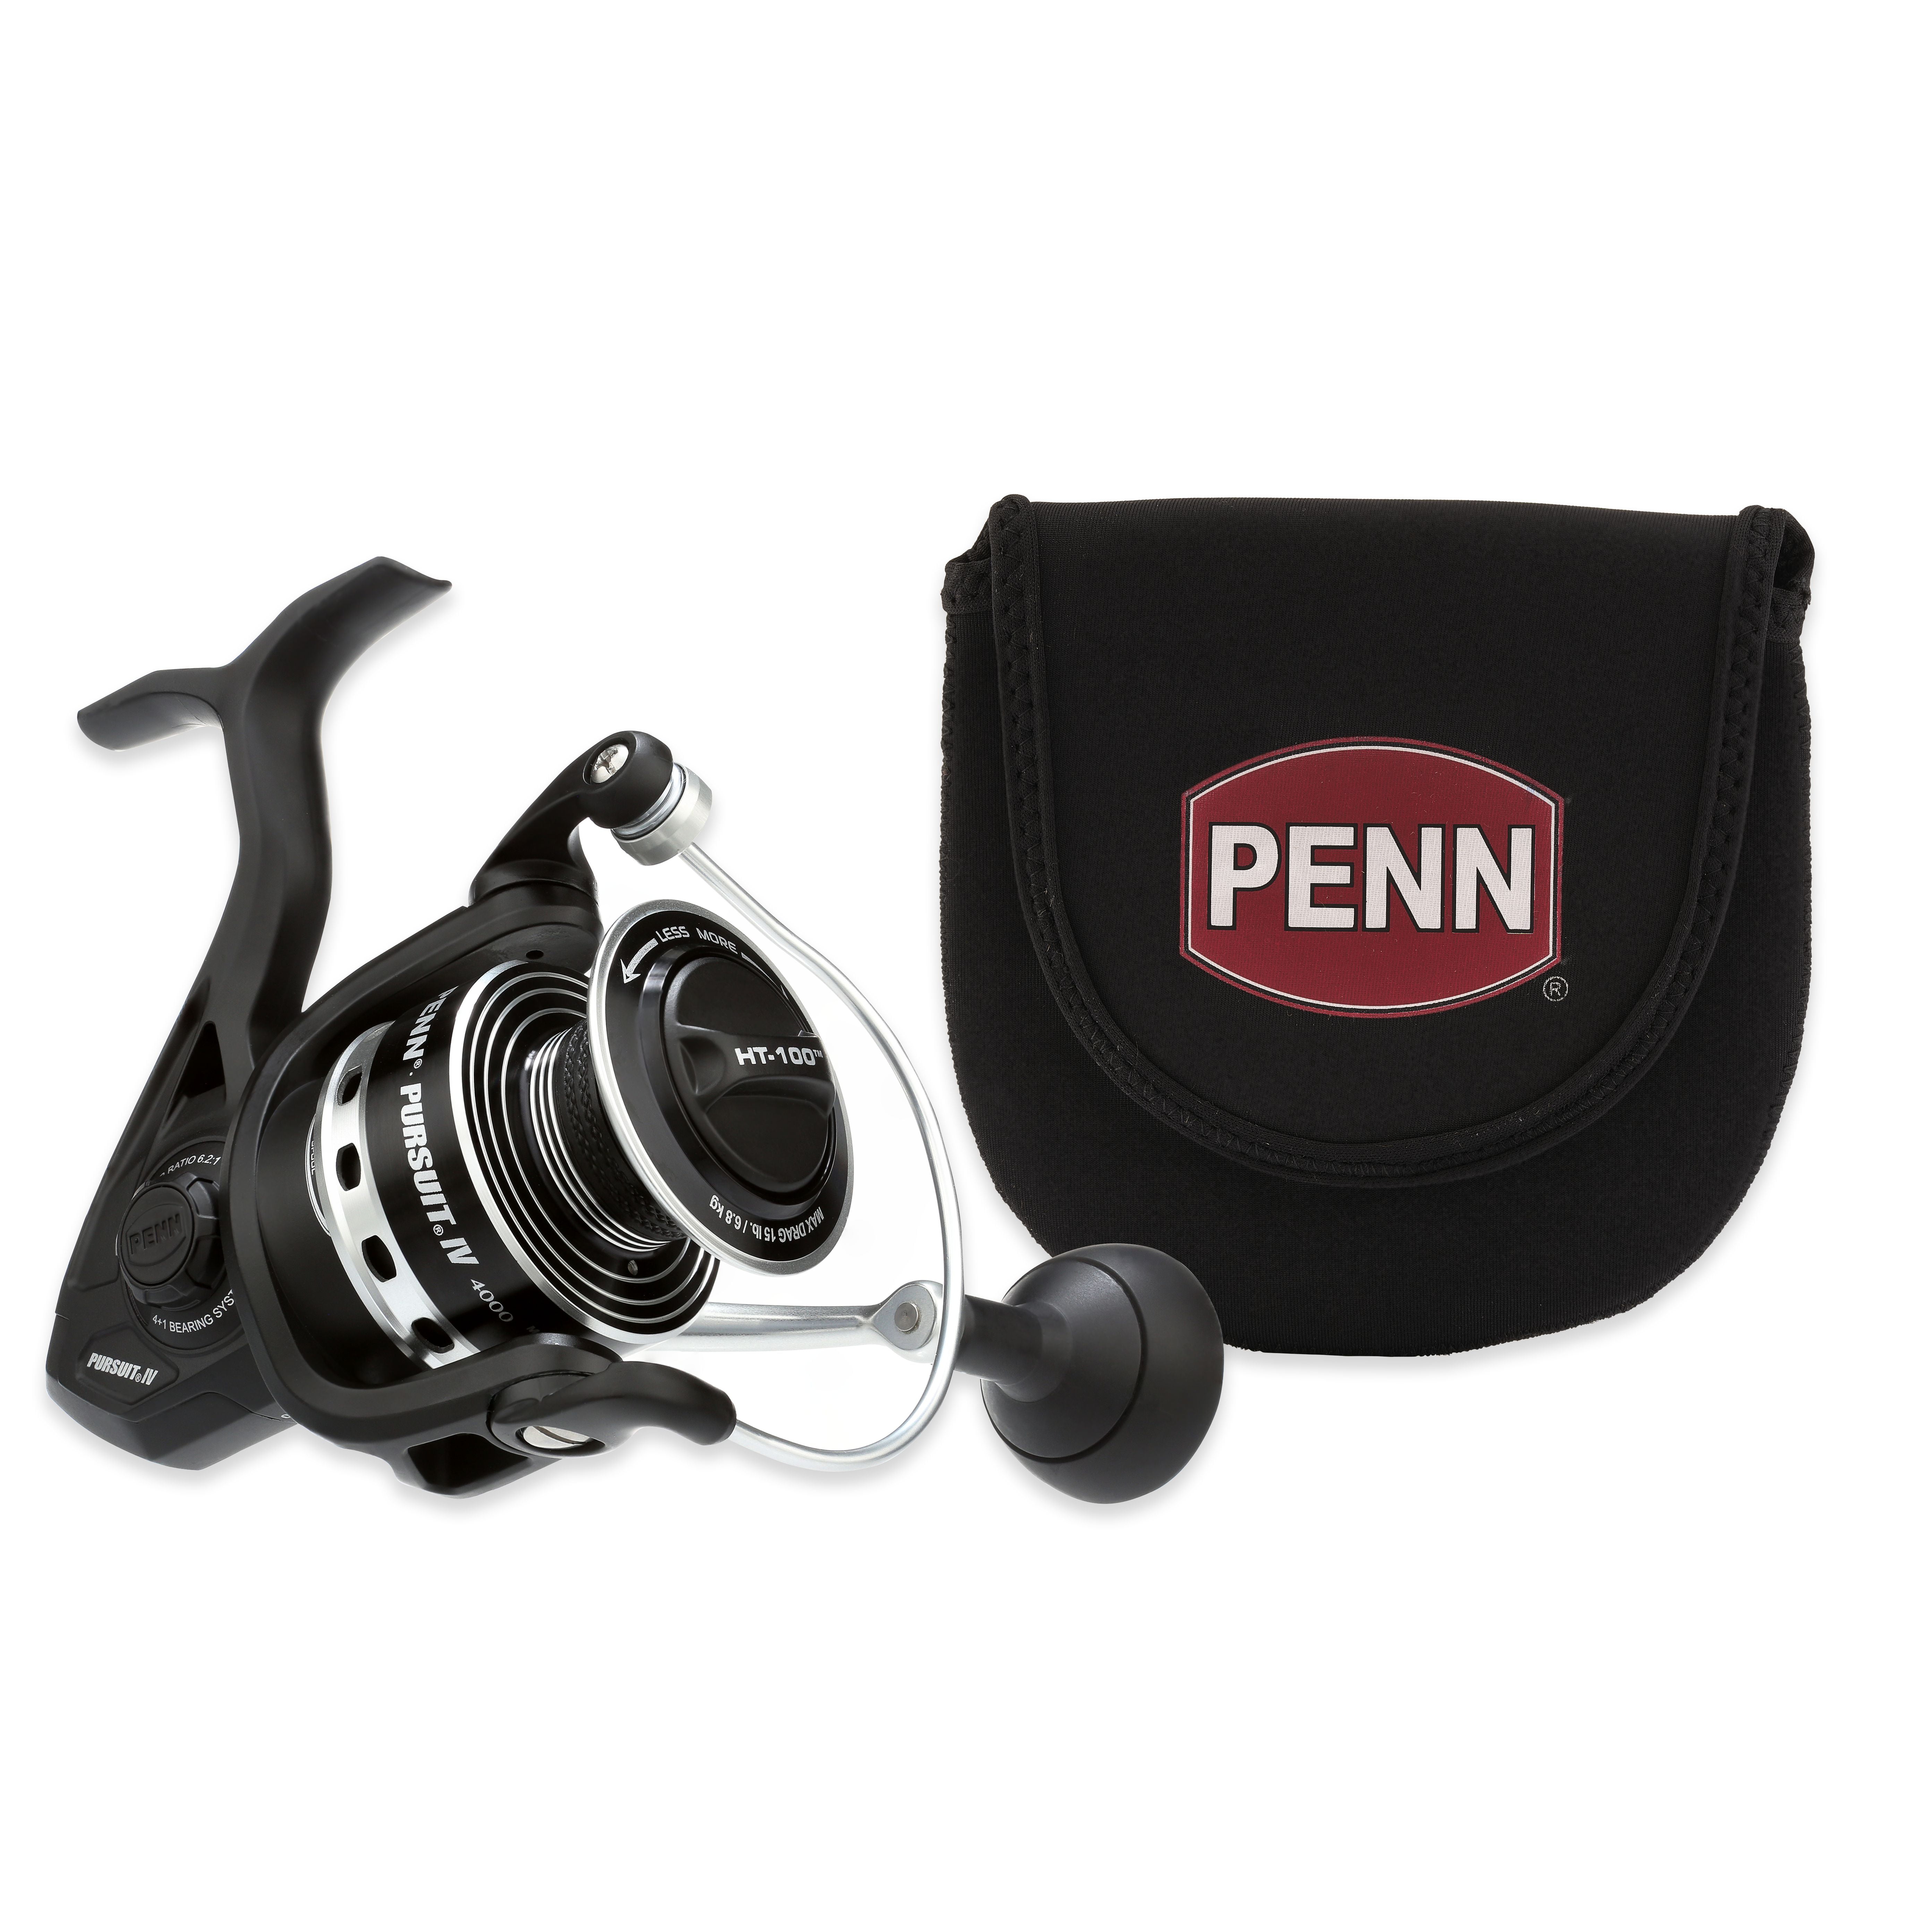 PENN Pursuit IV Spinning Reel Kit, Size 5000, Includes Reel Cover 